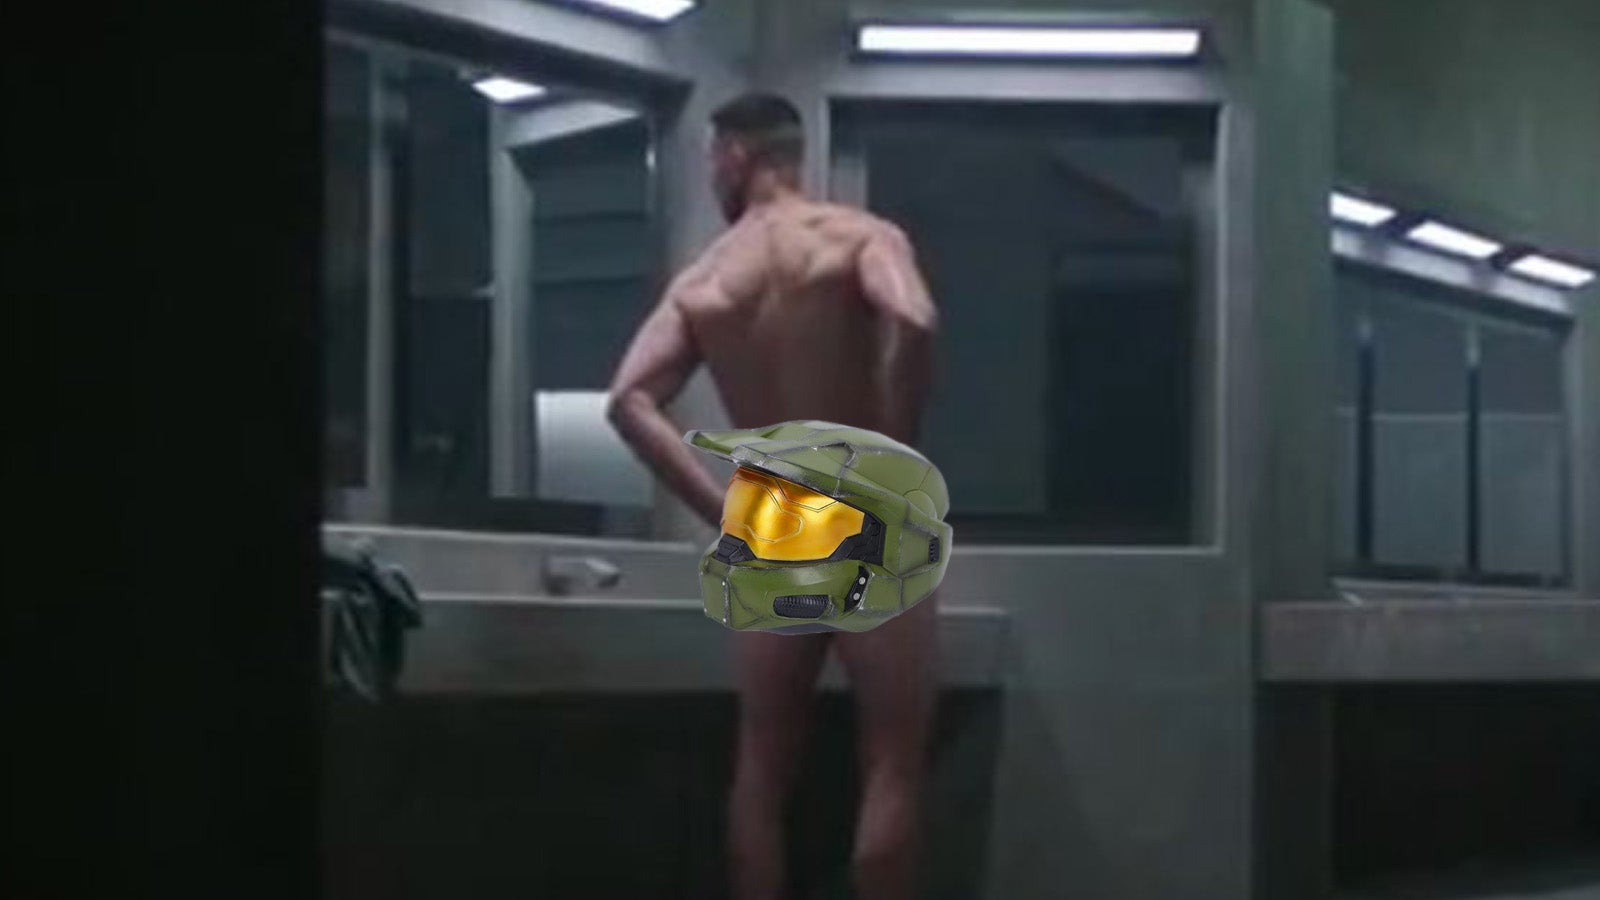 Image for After revealing Master Chief's face, the Halo TV series has now shown his nude bum